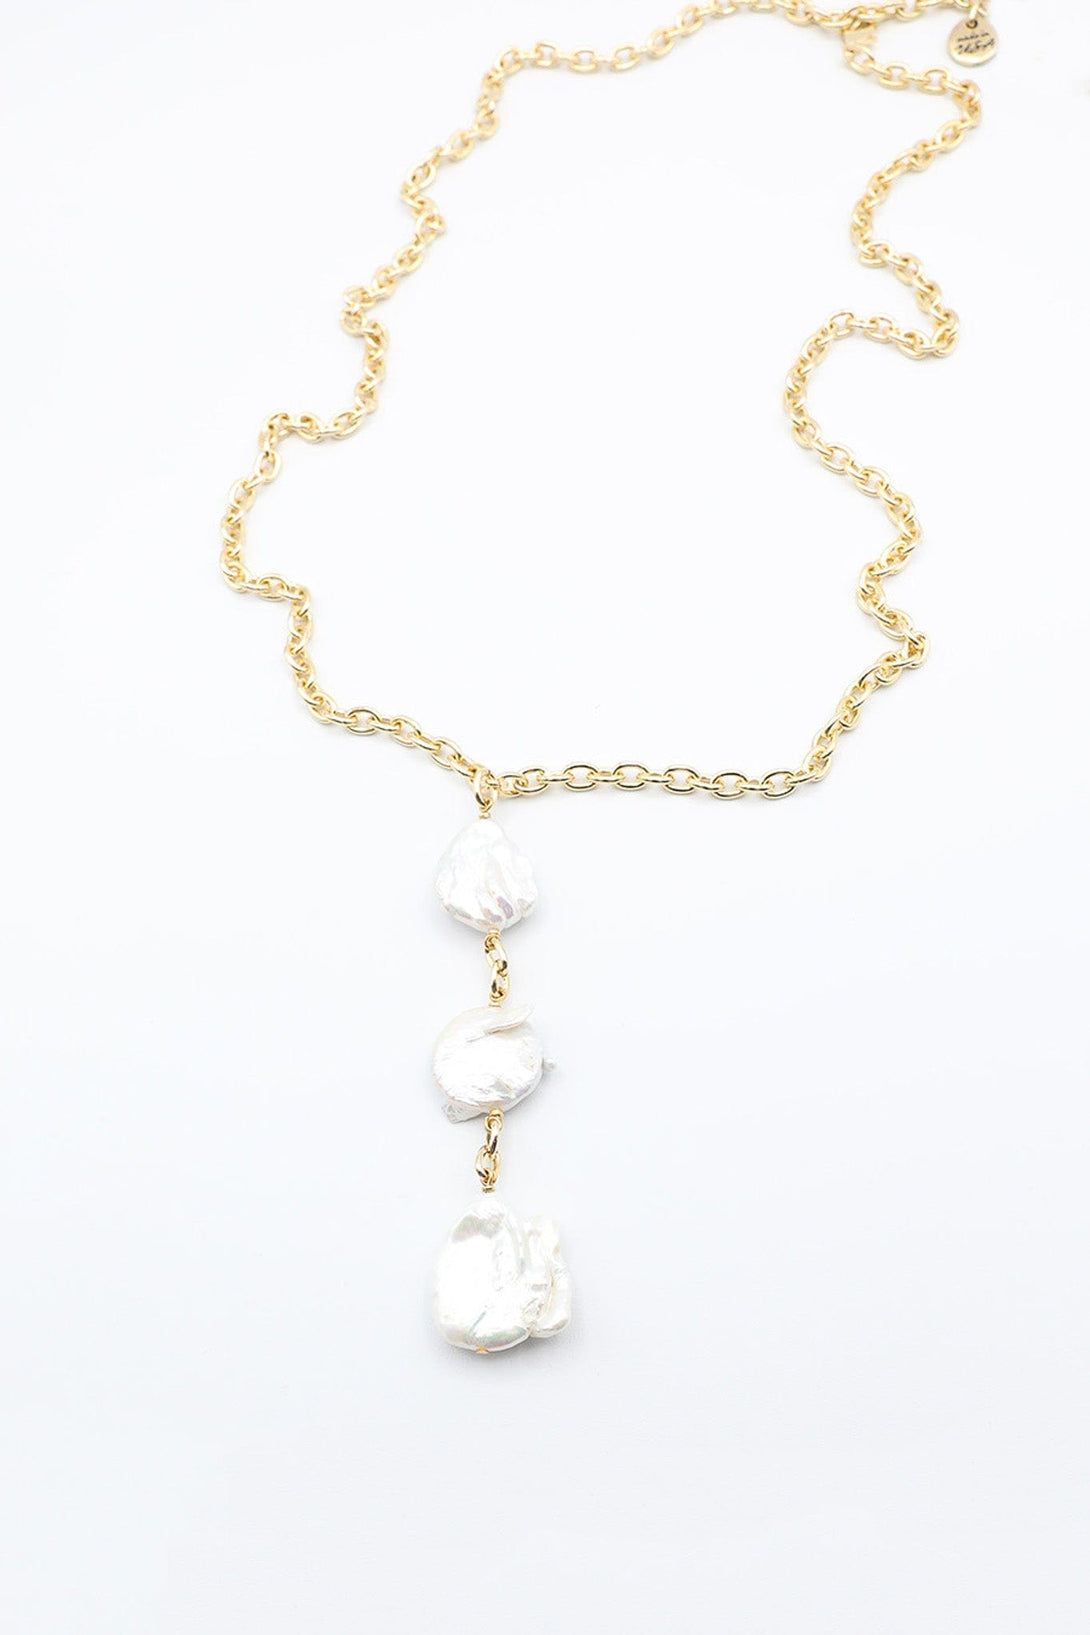 Long Gold Necklace with Drop Feature of Three Large Flat Freshwater Pearls